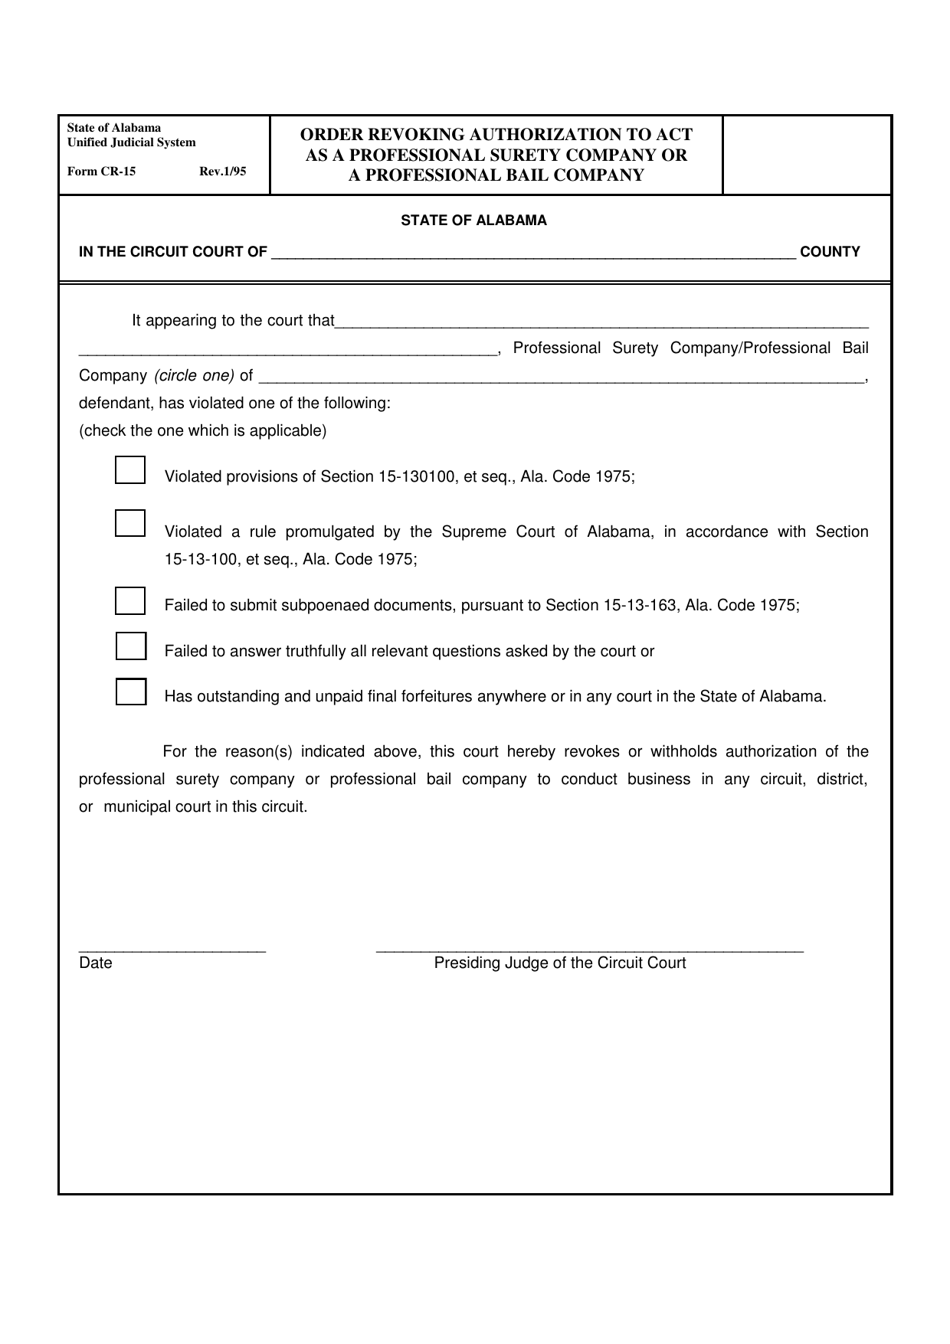 Form CR-15 Order Revoking Authorization to Act as a Professional Surety Company or a Professional Bail Company - Alabama, Page 1